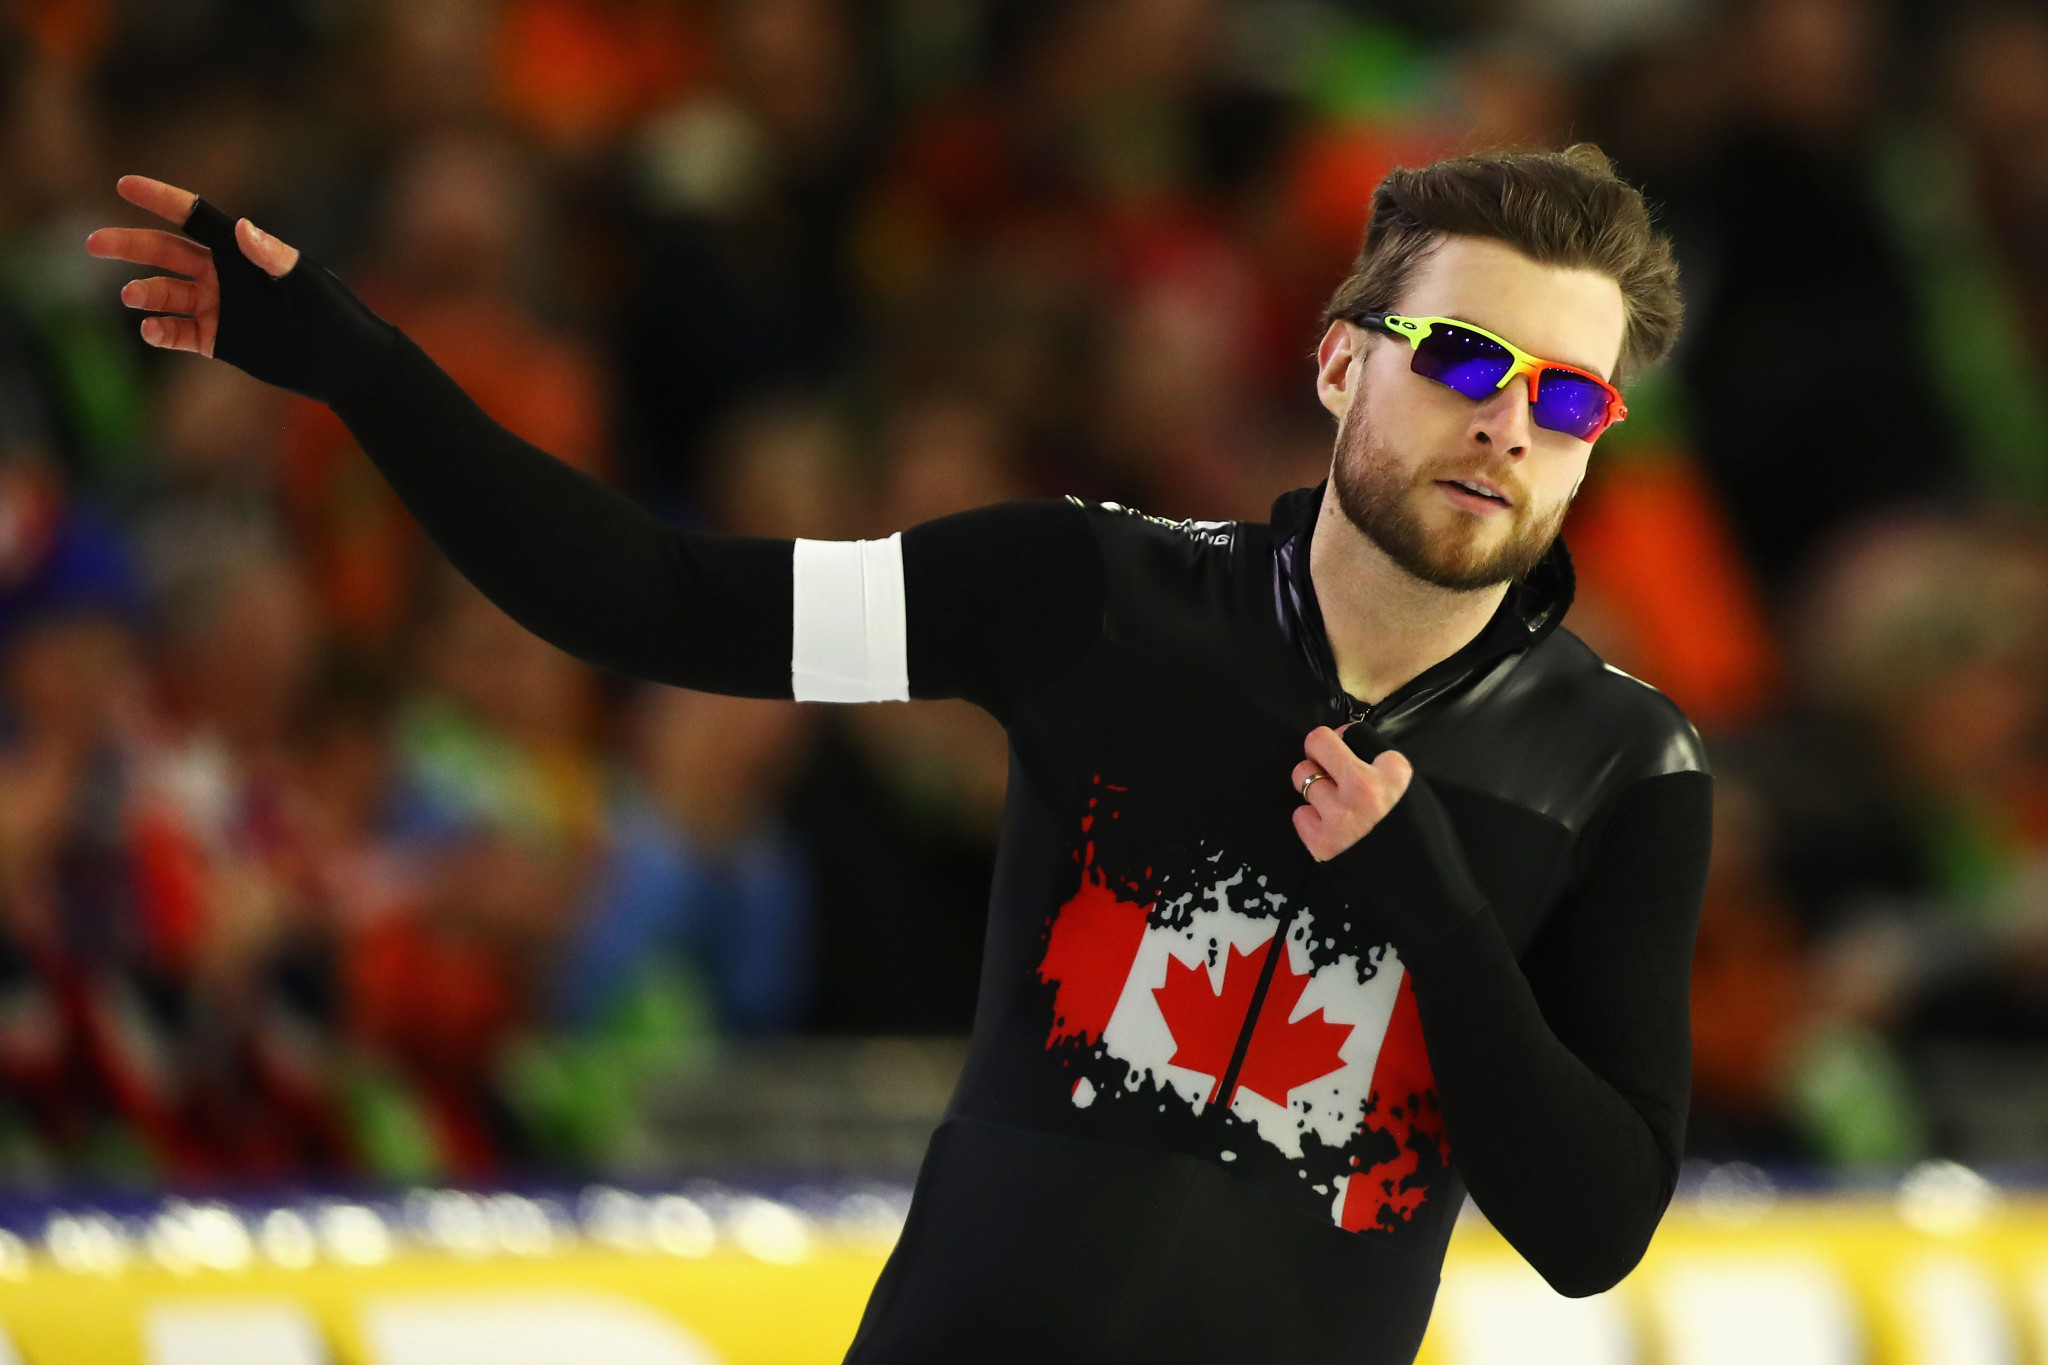 Laurent Dubreuil won a pair of major medals in the 2019-2020 season ©Speed Skating Canada